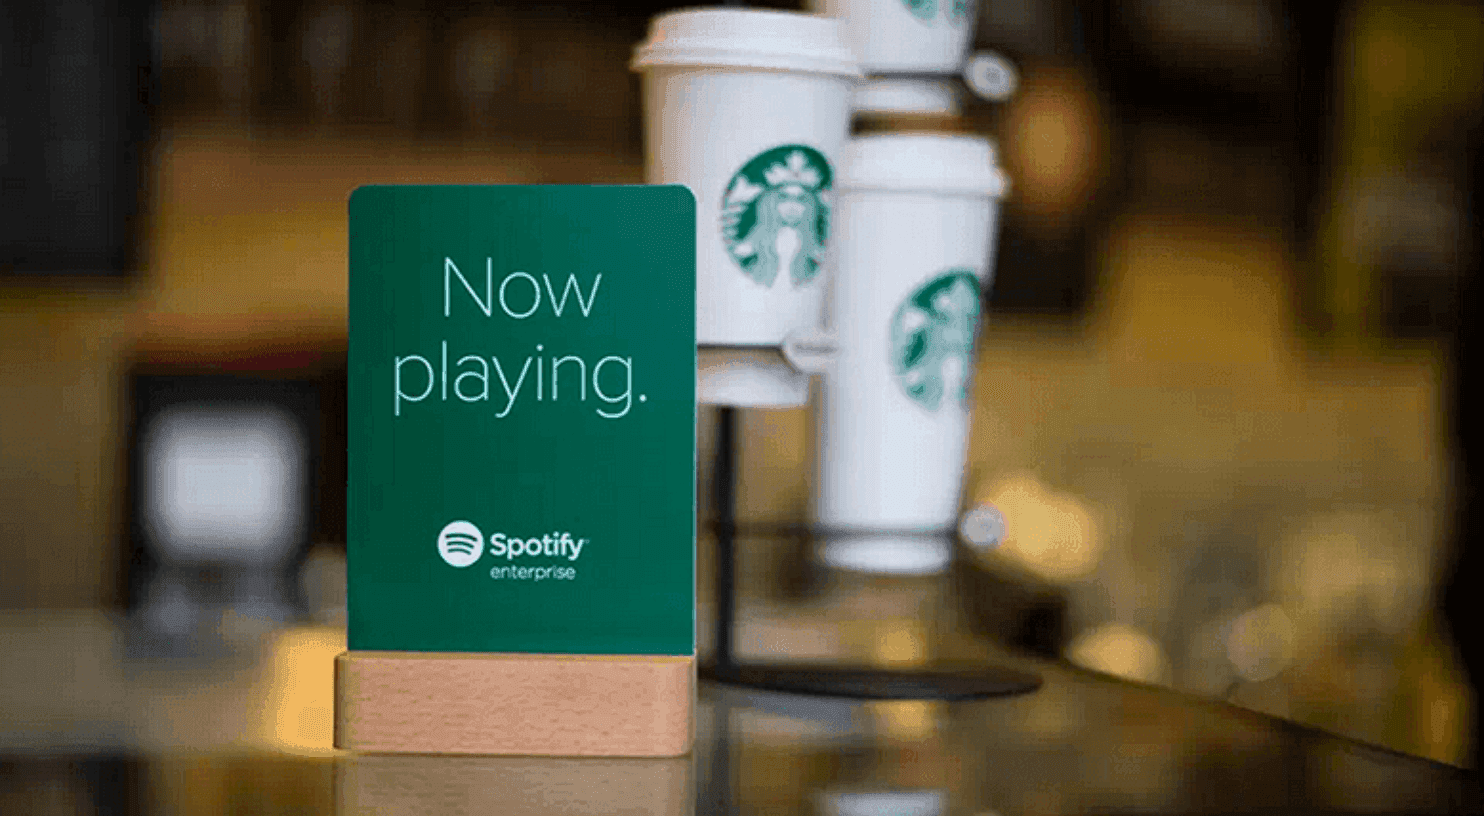 Starbucks coffee cups standing next to Spotify "Now Playing" card